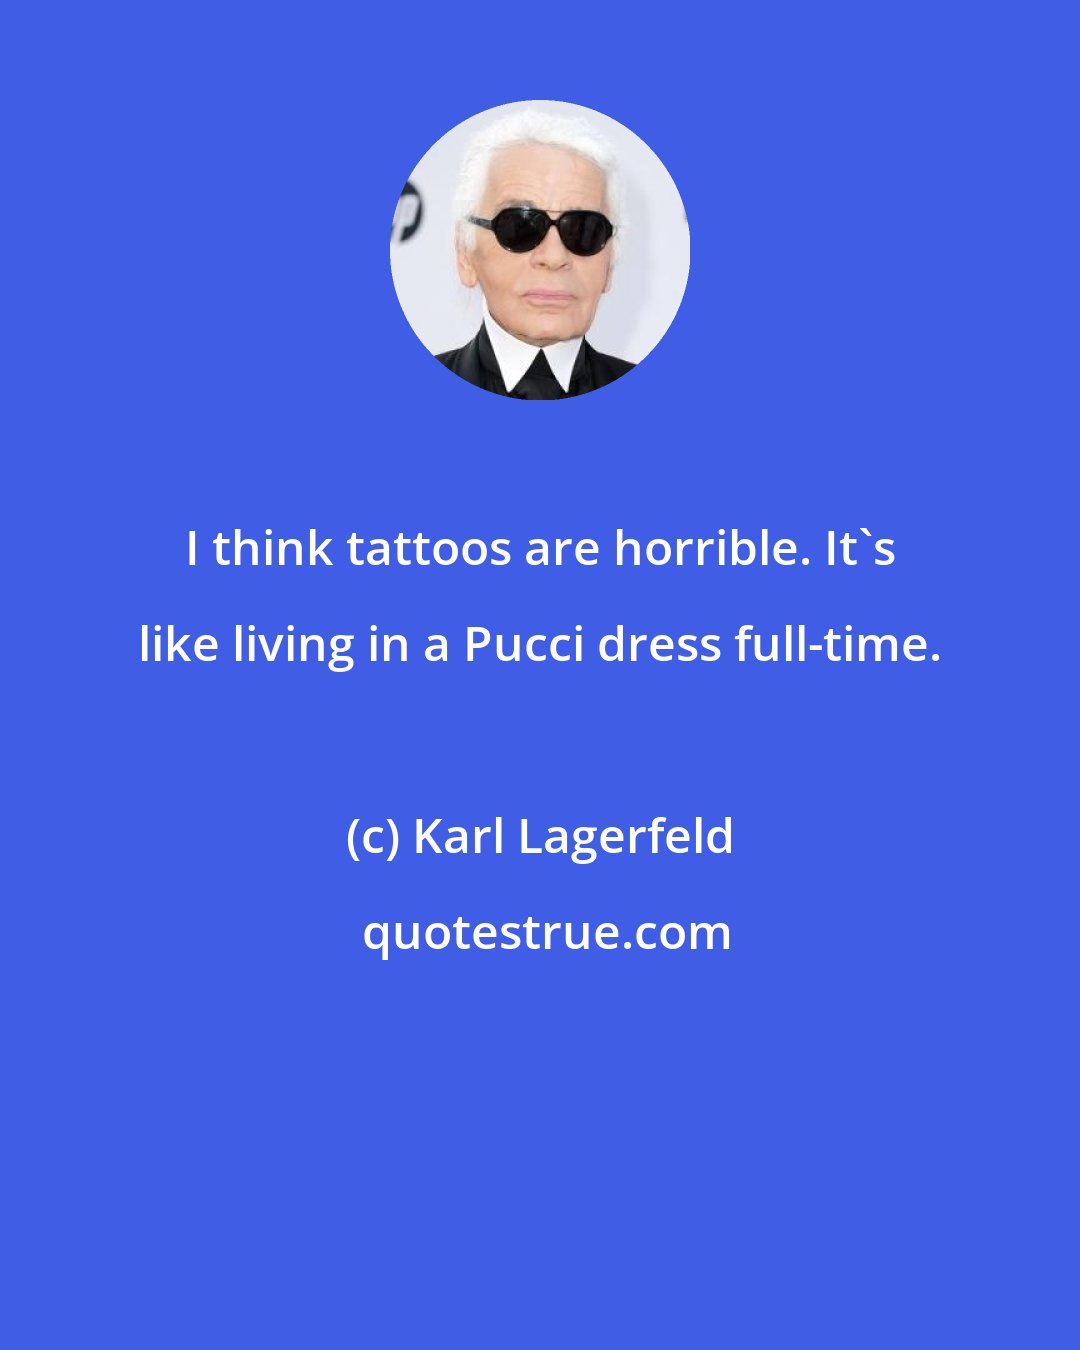 Karl Lagerfeld: I think tattoos are horrible. It's like living in a Pucci dress full-time.